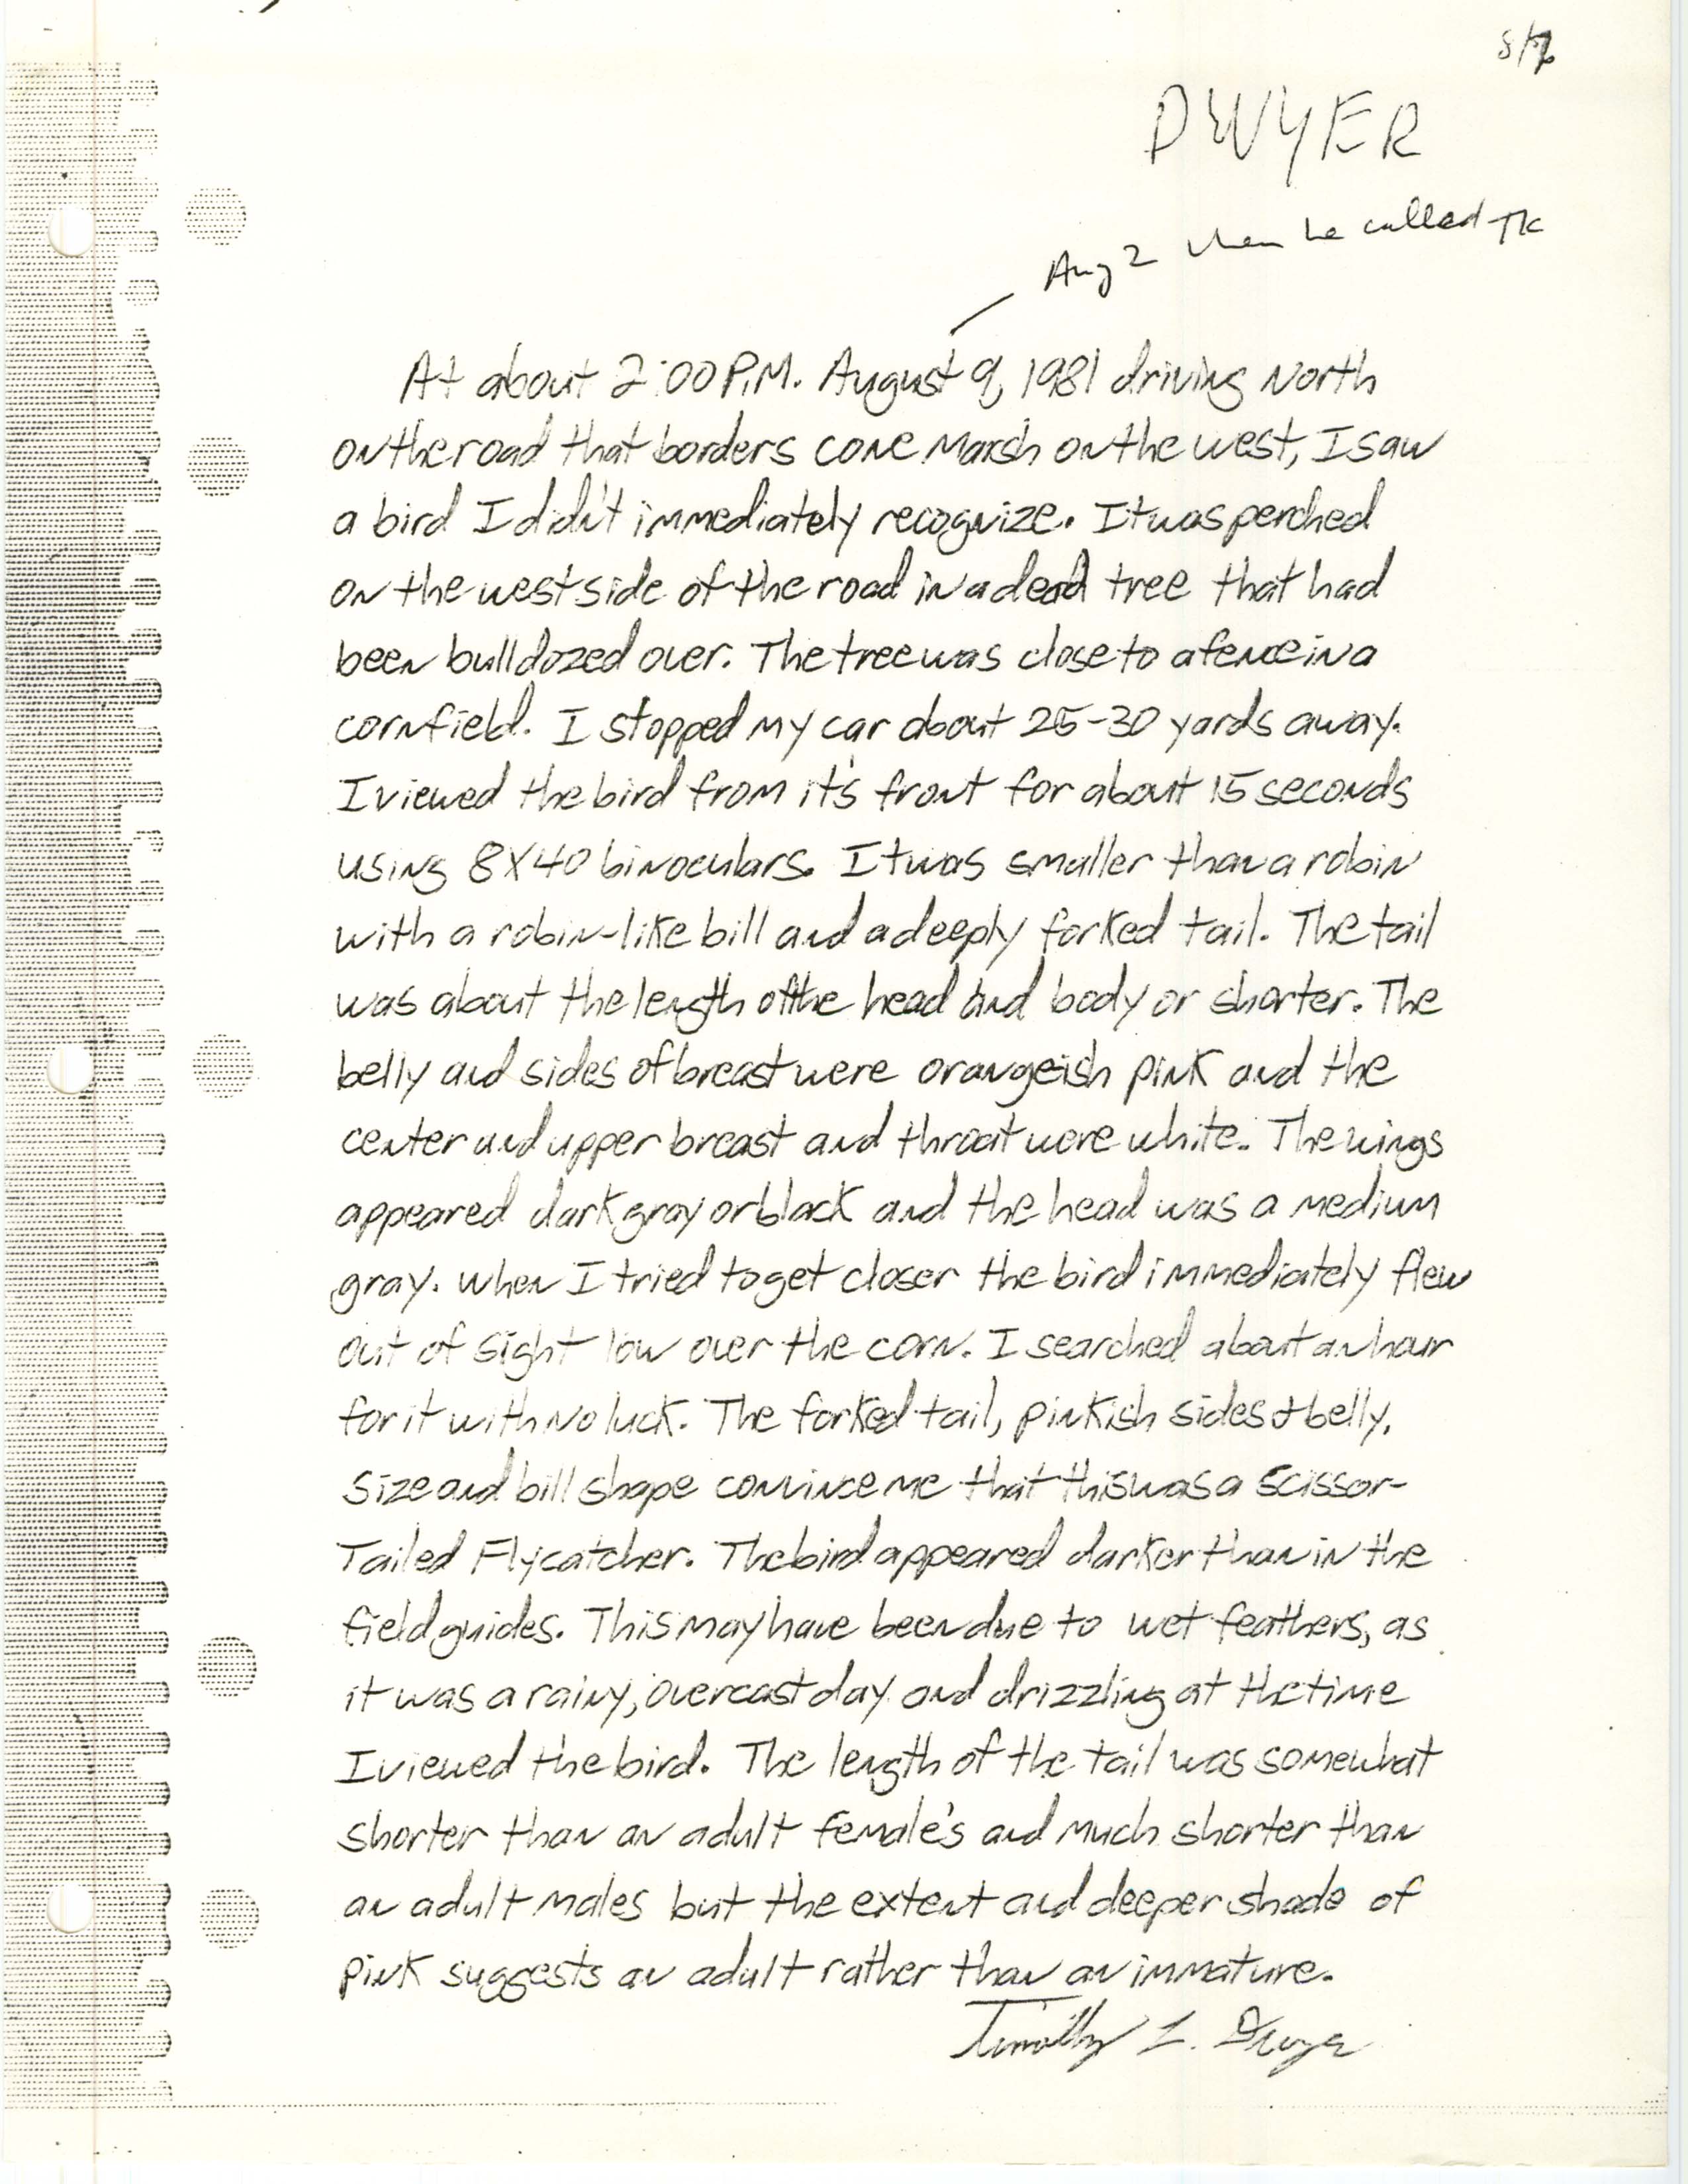 Field notes for Scissor-tailed Flycatcher at Cone Marsh, August 1981